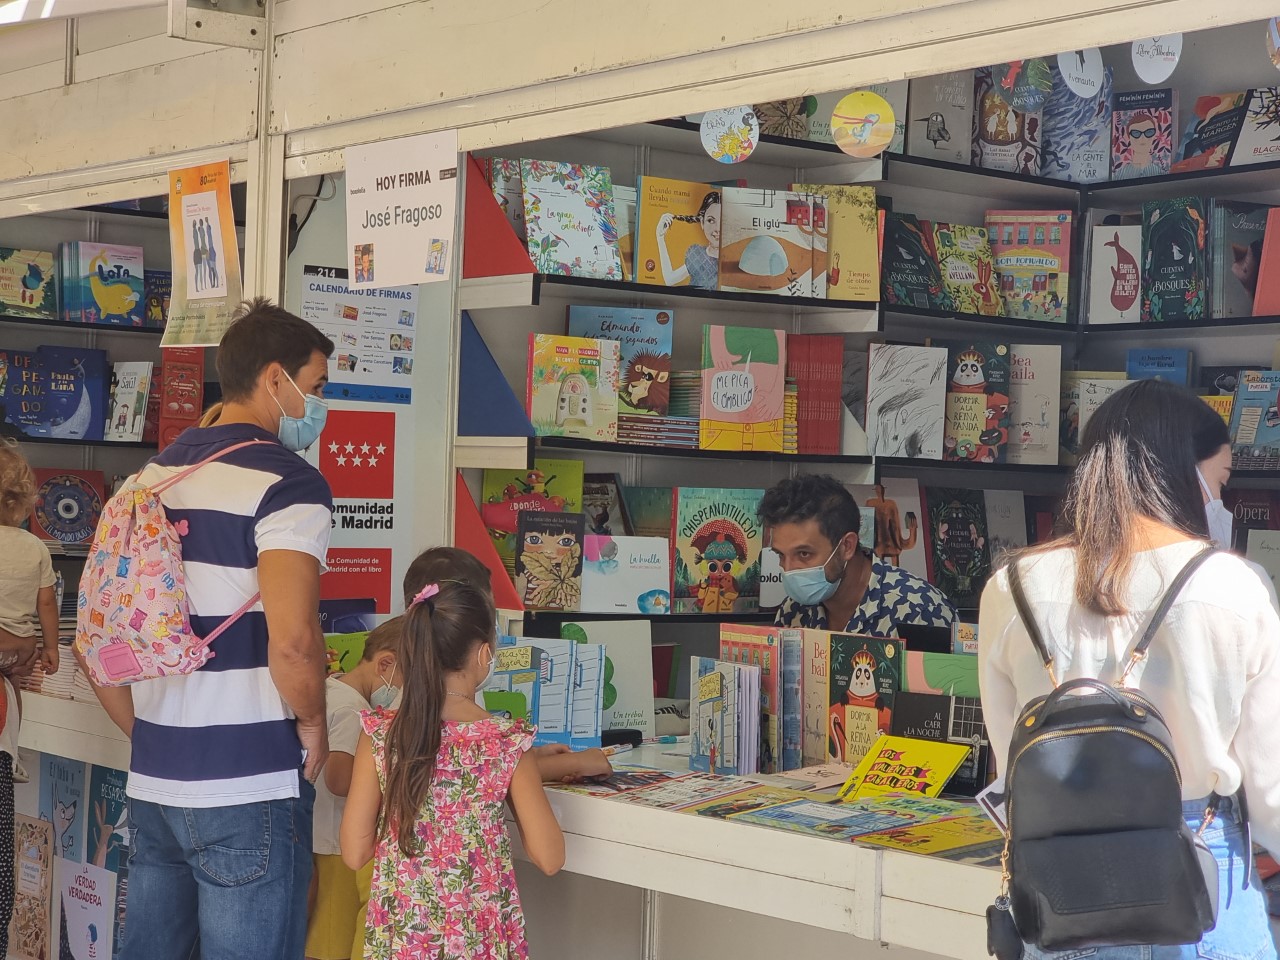 International Book Fair in Madrid attracted people of all ages